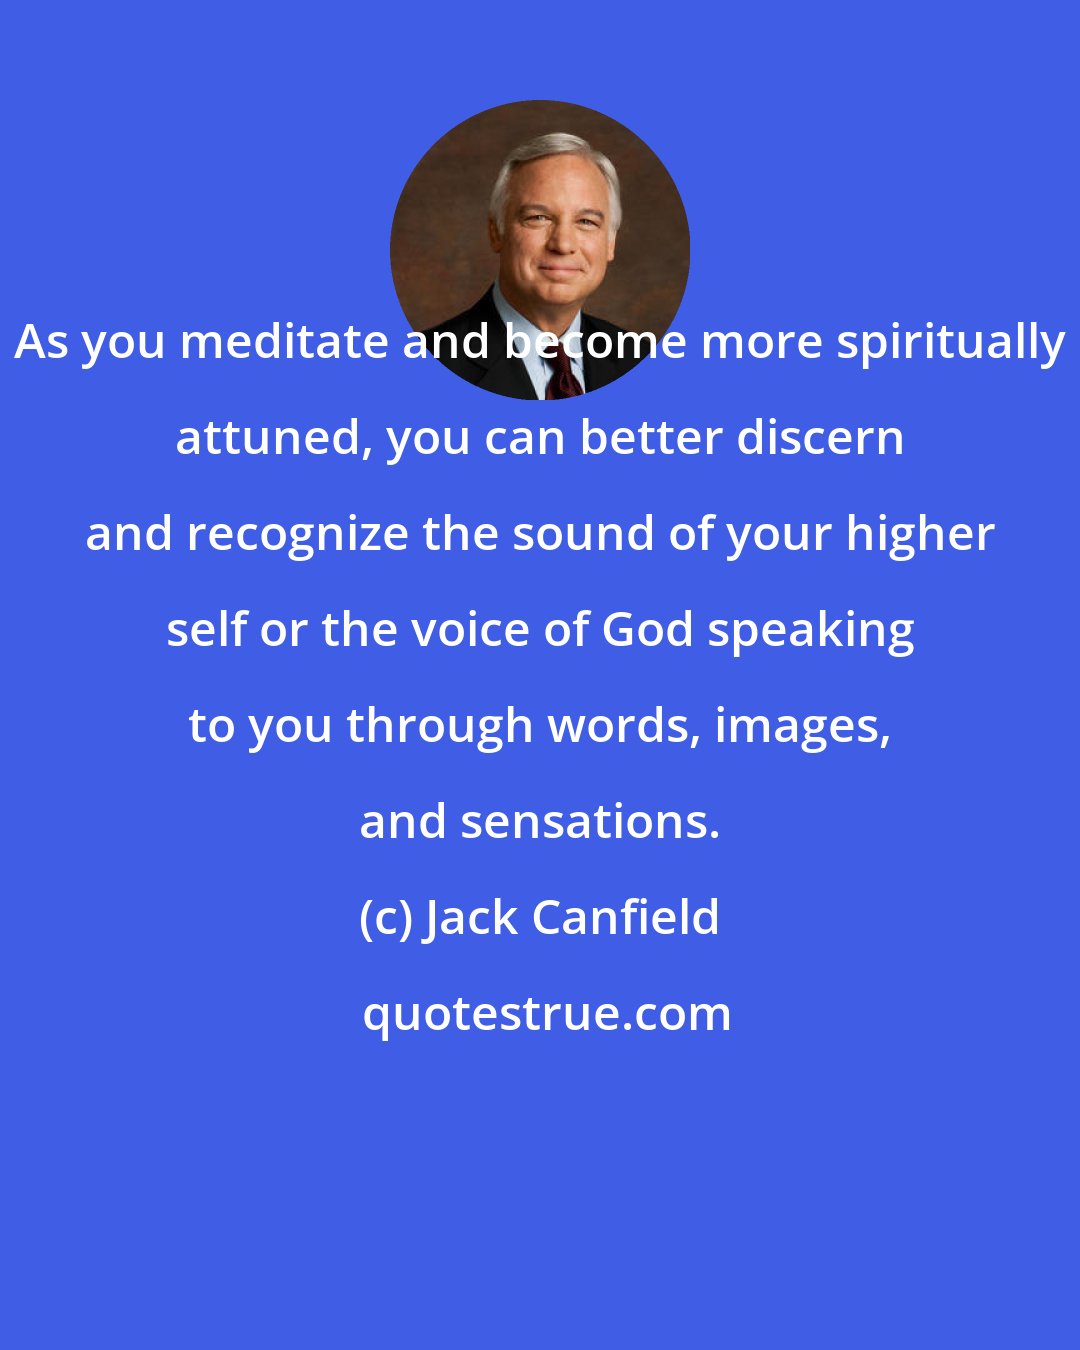 Jack Canfield: As you meditate and become more spiritually attuned, you can better discern and recognize the sound of your higher self or the voice of God speaking to you through words, images, and sensations.